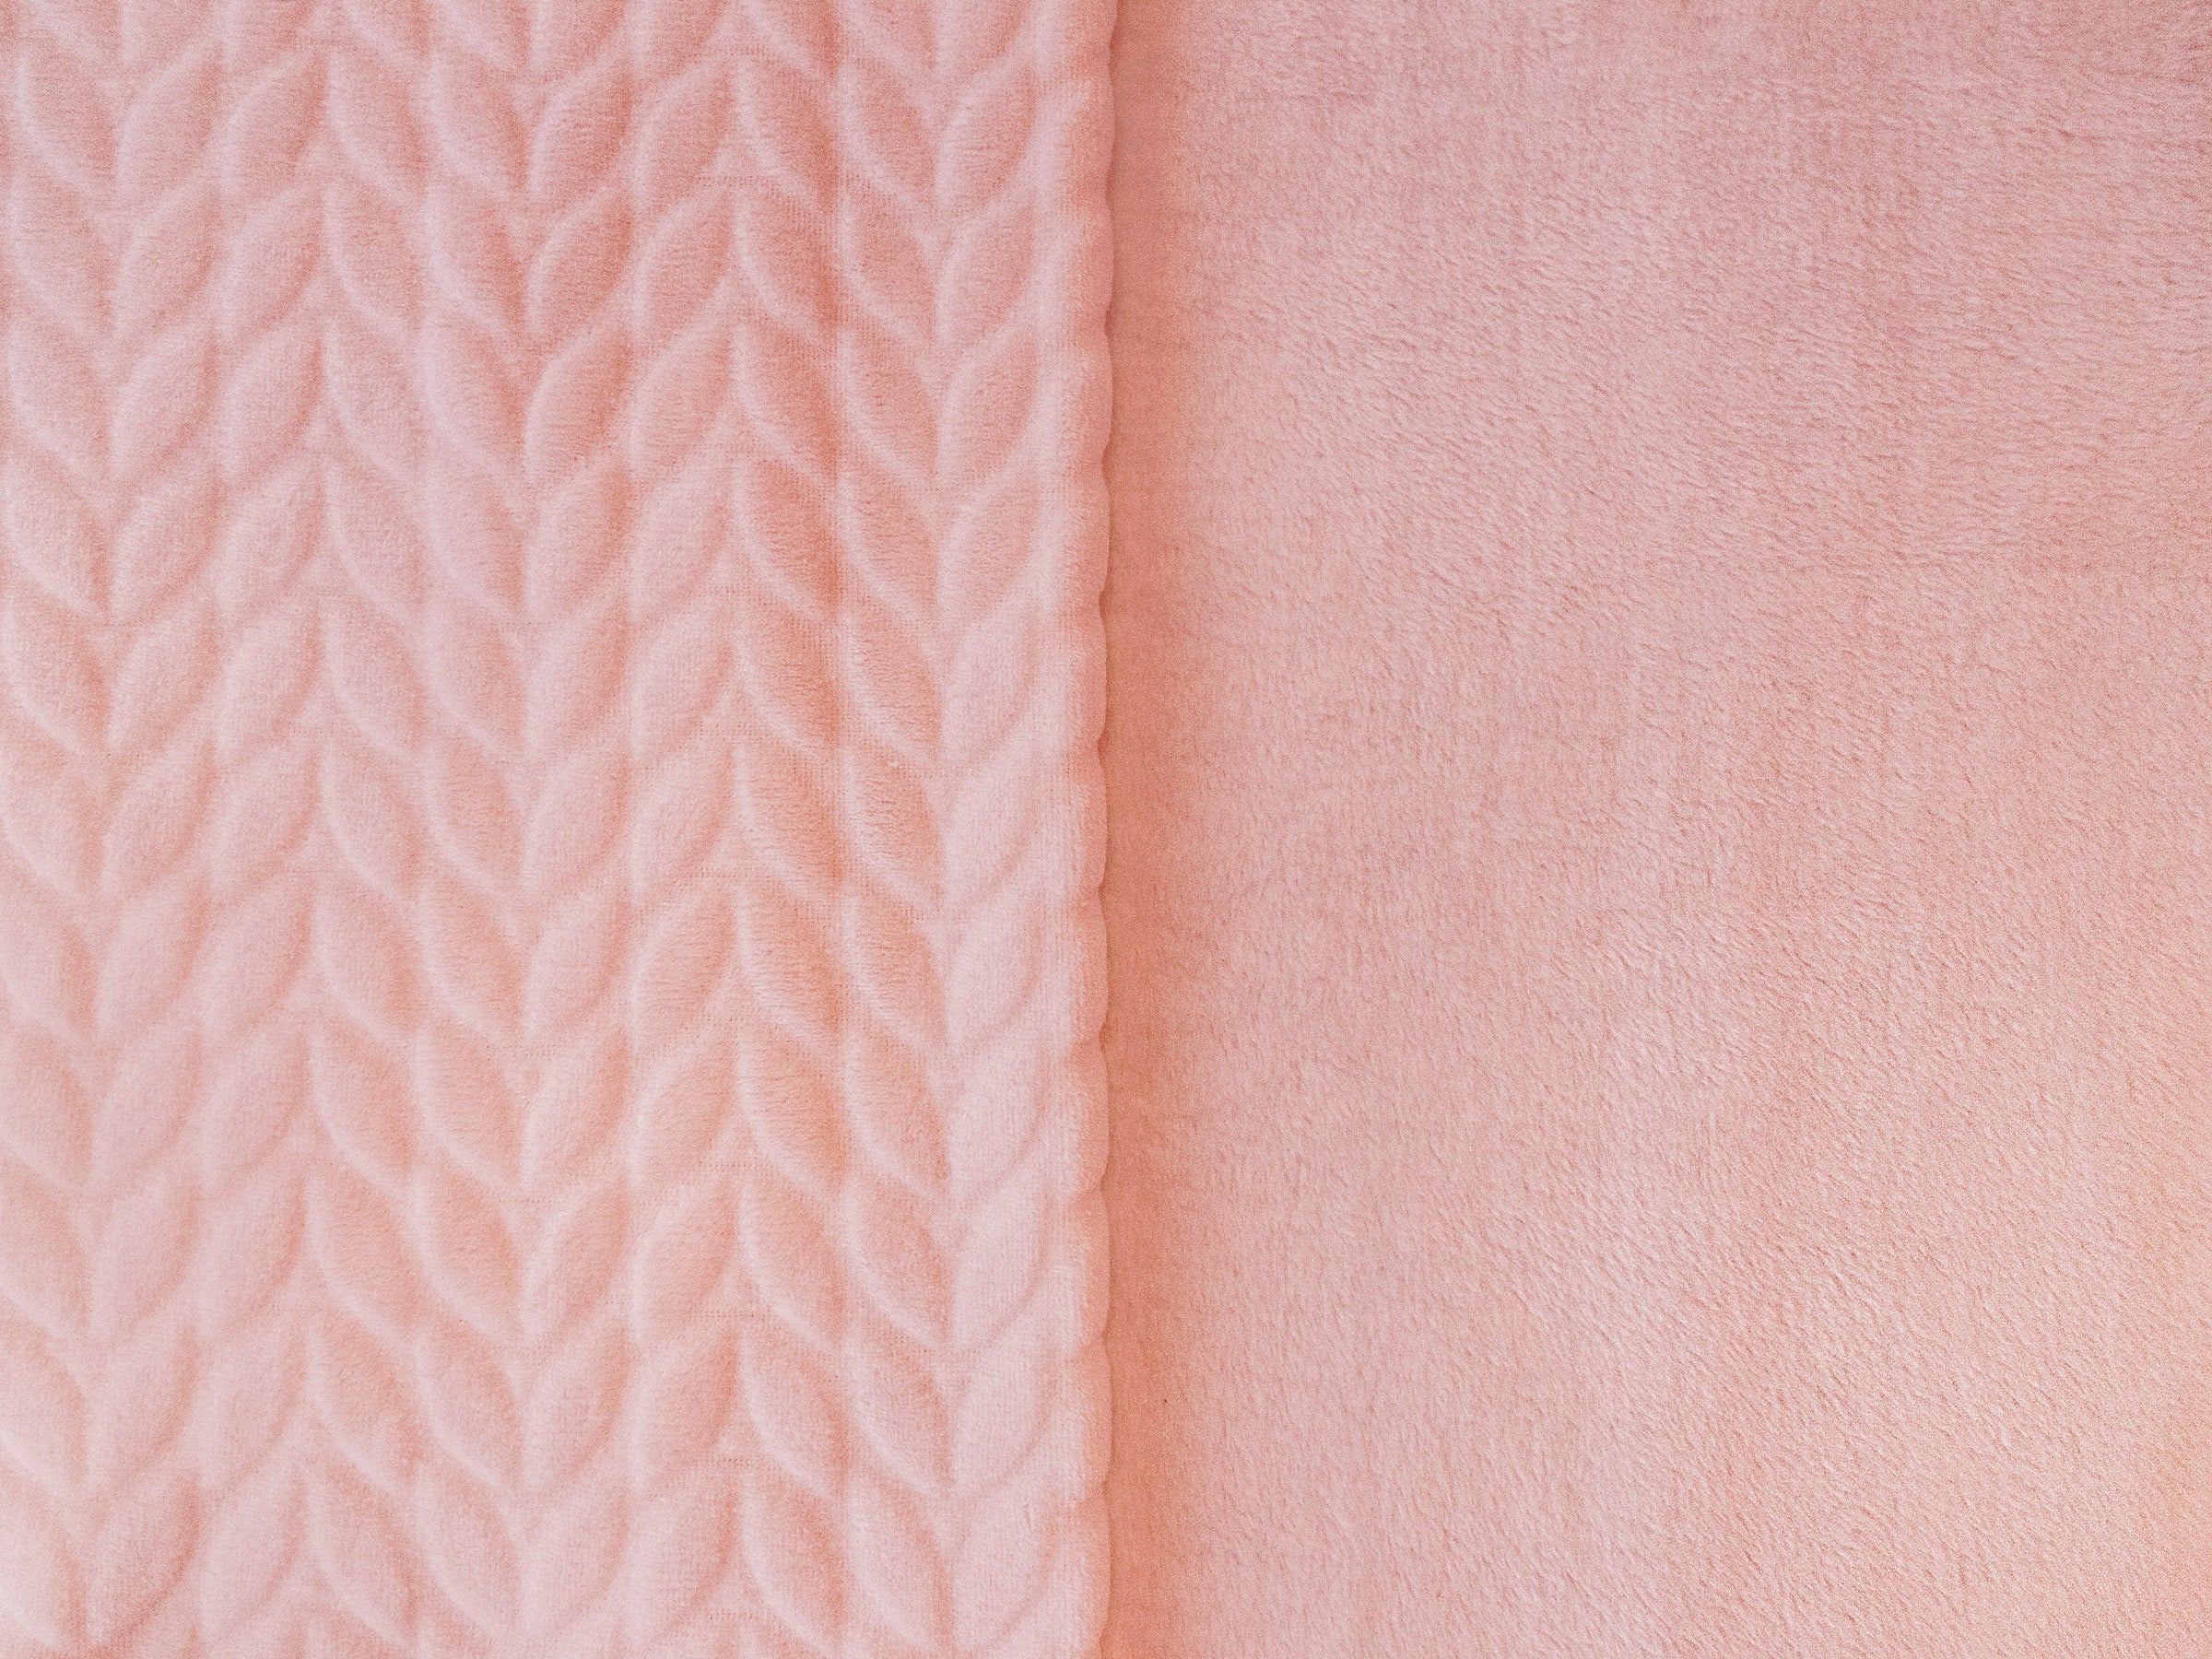 Stitch & Sparkle 100% Polyester Squiggly Minky  Fleece, Med Pink, Blanket Fabric, Apparel Fabric, Nurcery Fabric, 60'', 245Gsm